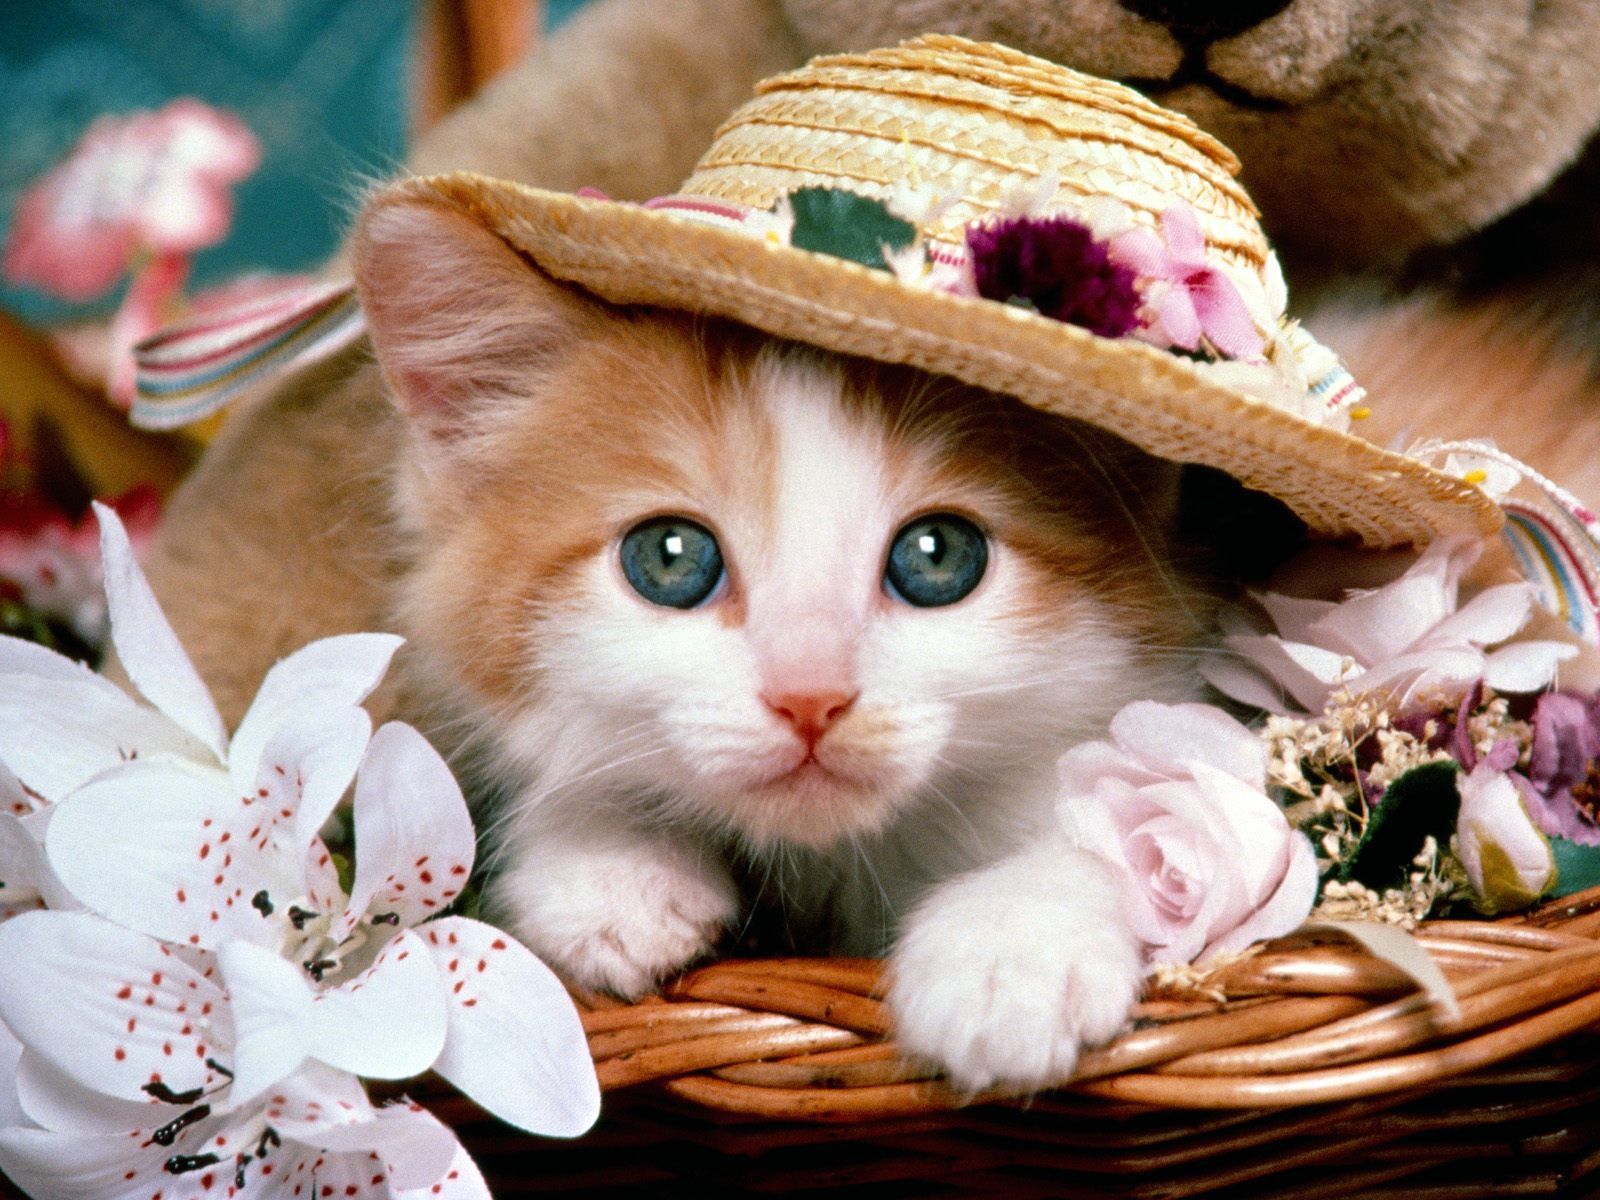 Cute Cats & Dogs Wallpapers Images Free Download For Desktop ...